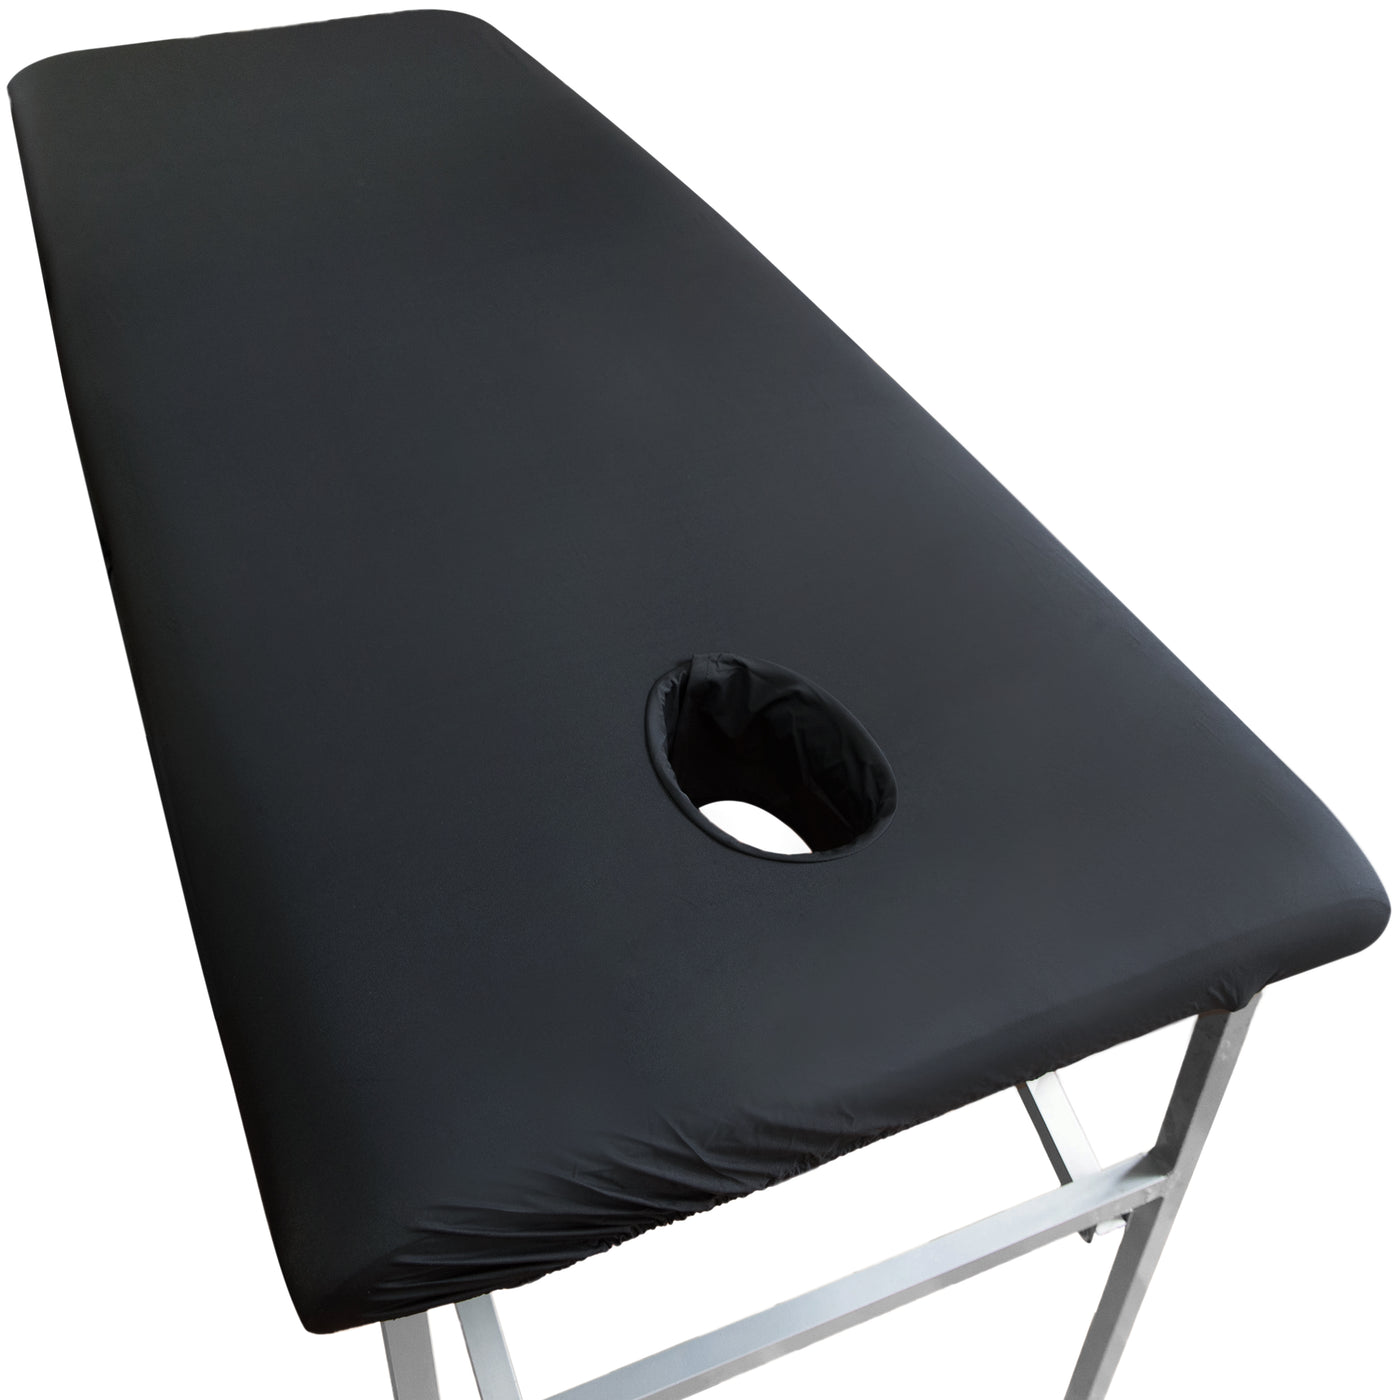 Eroticgel Waterproof Massage Table Fitted Sheet with Face Insert 203cm x 83cm (80″x 32.67″)